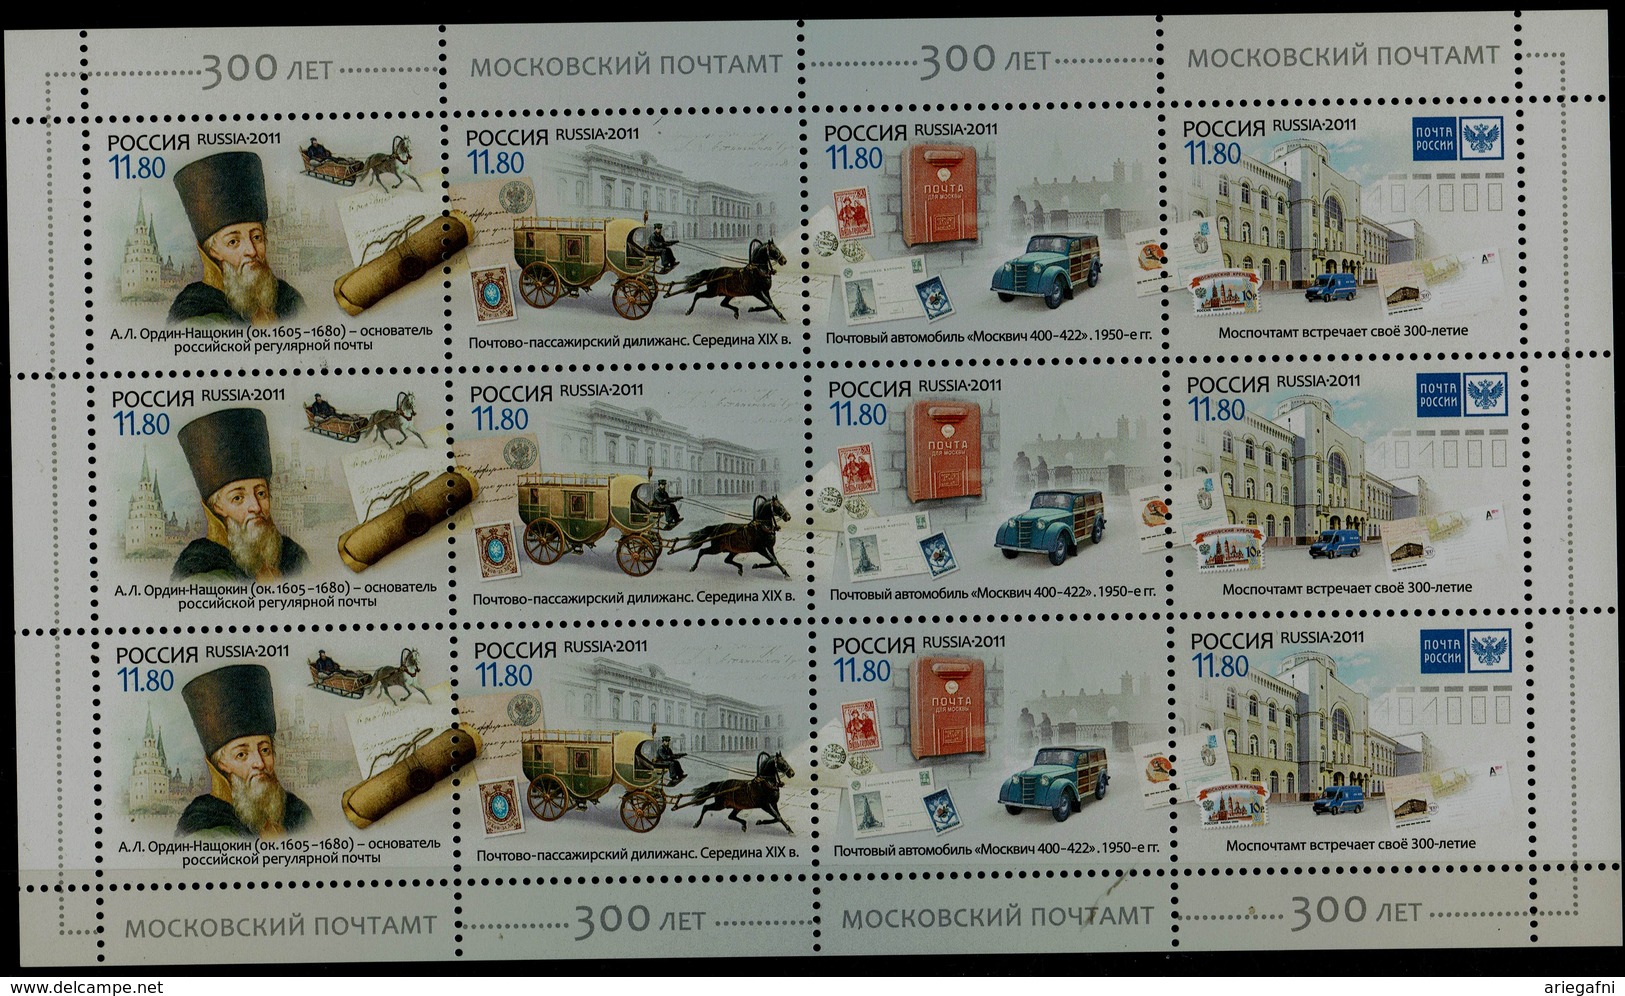 RUSSIA  2011 300 YEARS OF MOSCOW POST OFFICE FULL SHEET MI No 1786-9 MNH VF!! - Hojas Completas